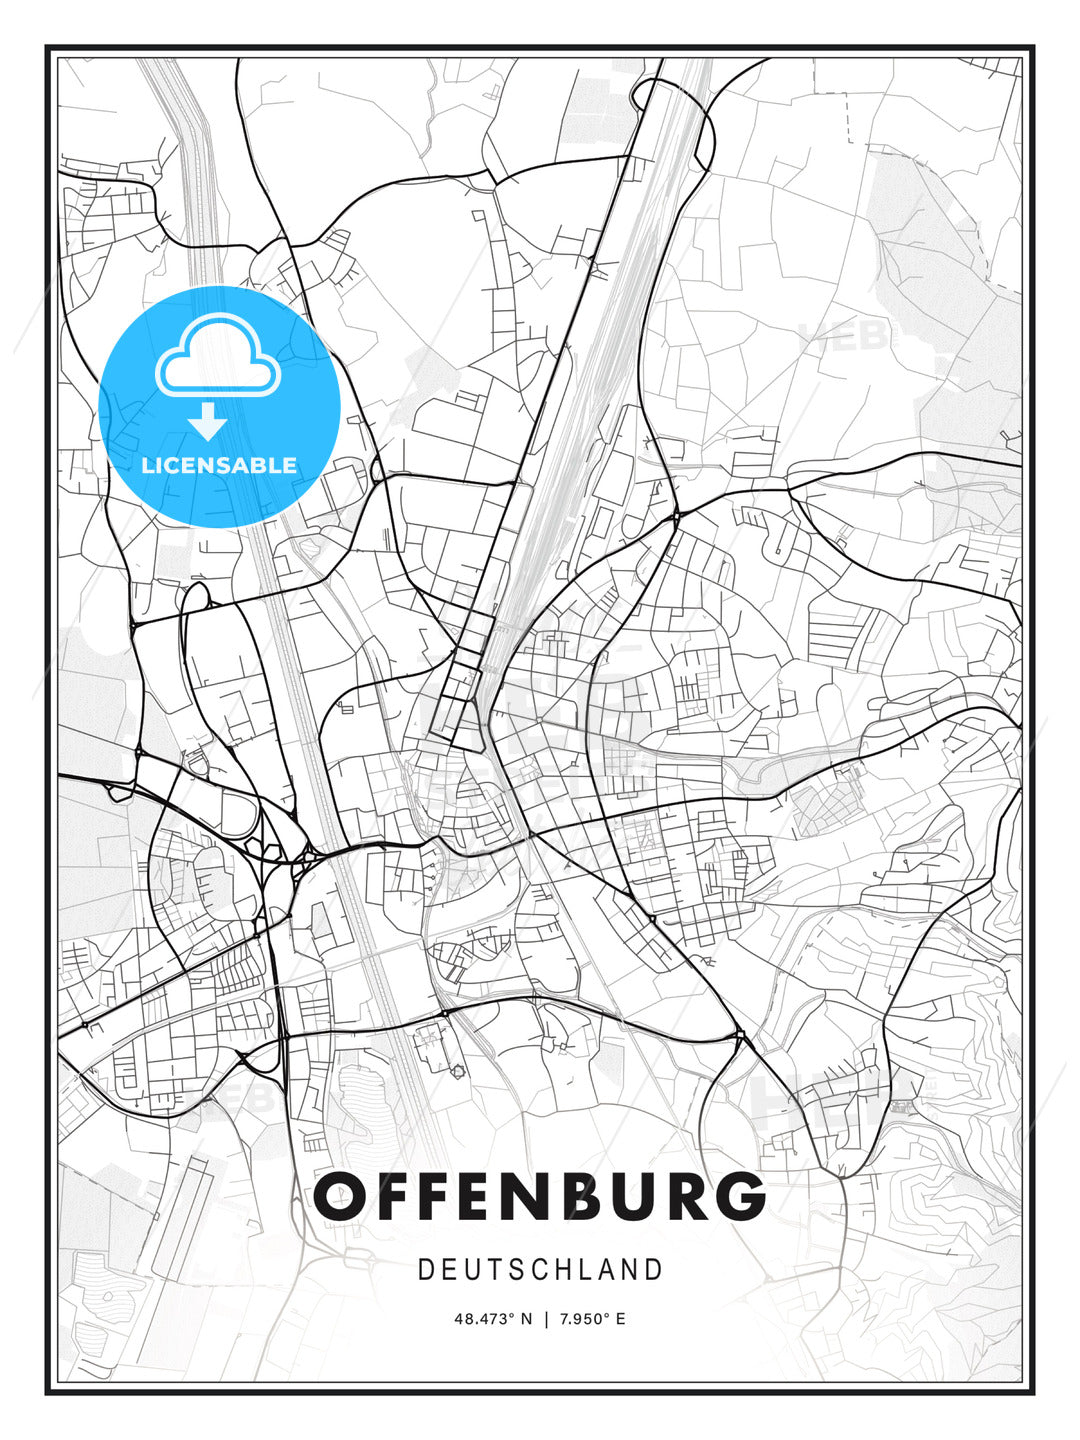 Offenburg, Germany, Modern Print Template in Various Formats - HEBSTREITS Sketches